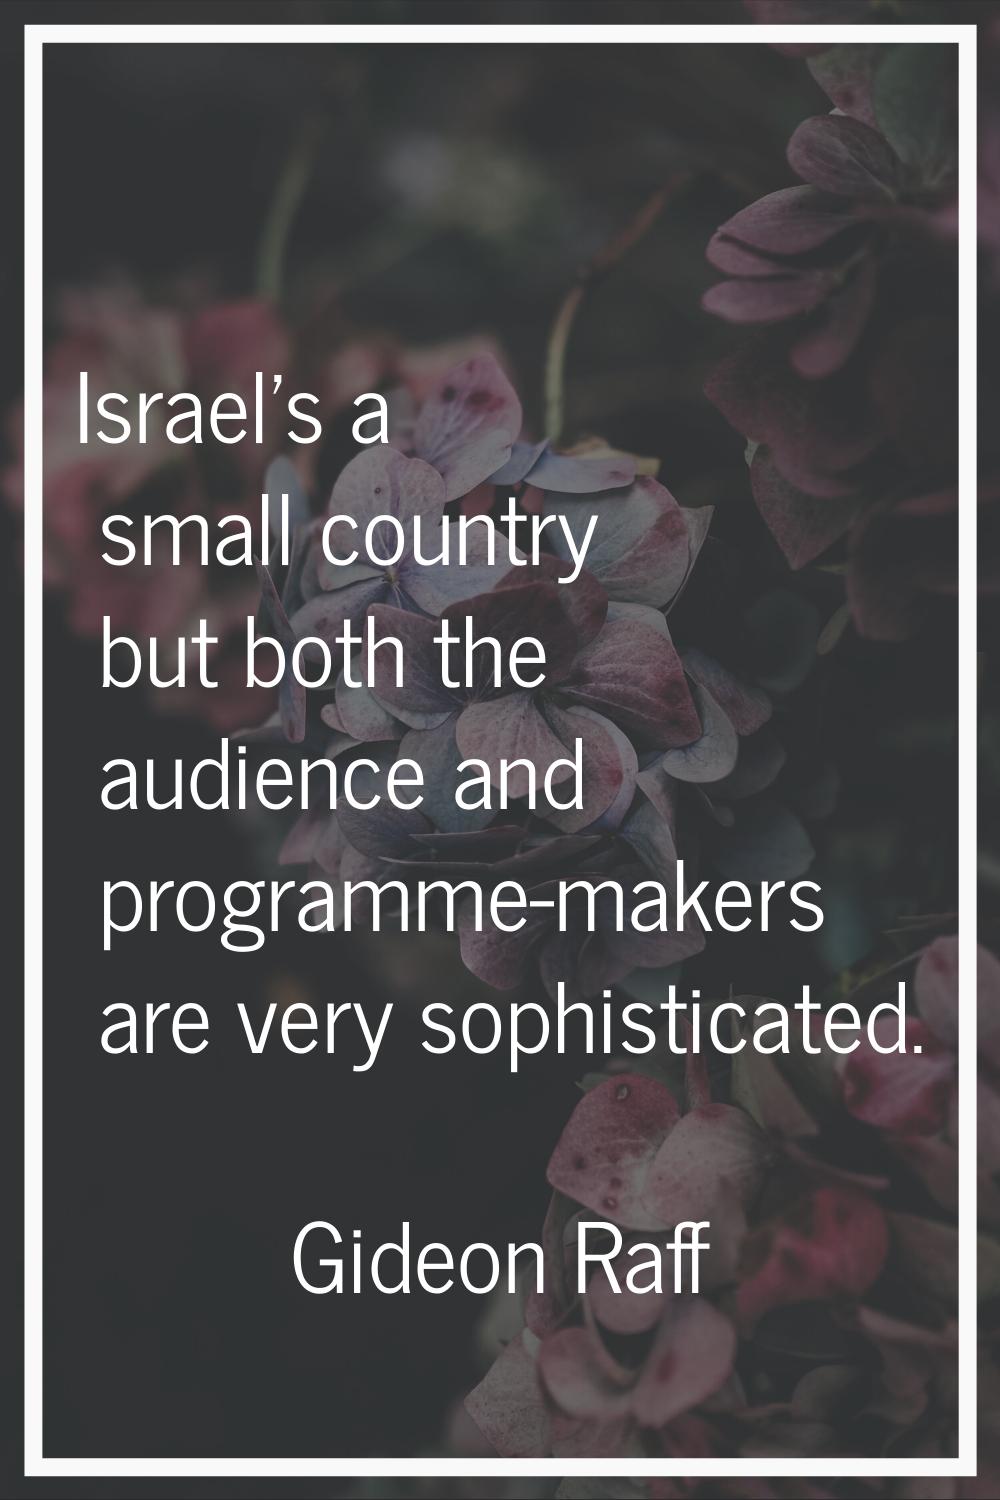 Israel's a small country but both the audience and programme-makers are very sophisticated.